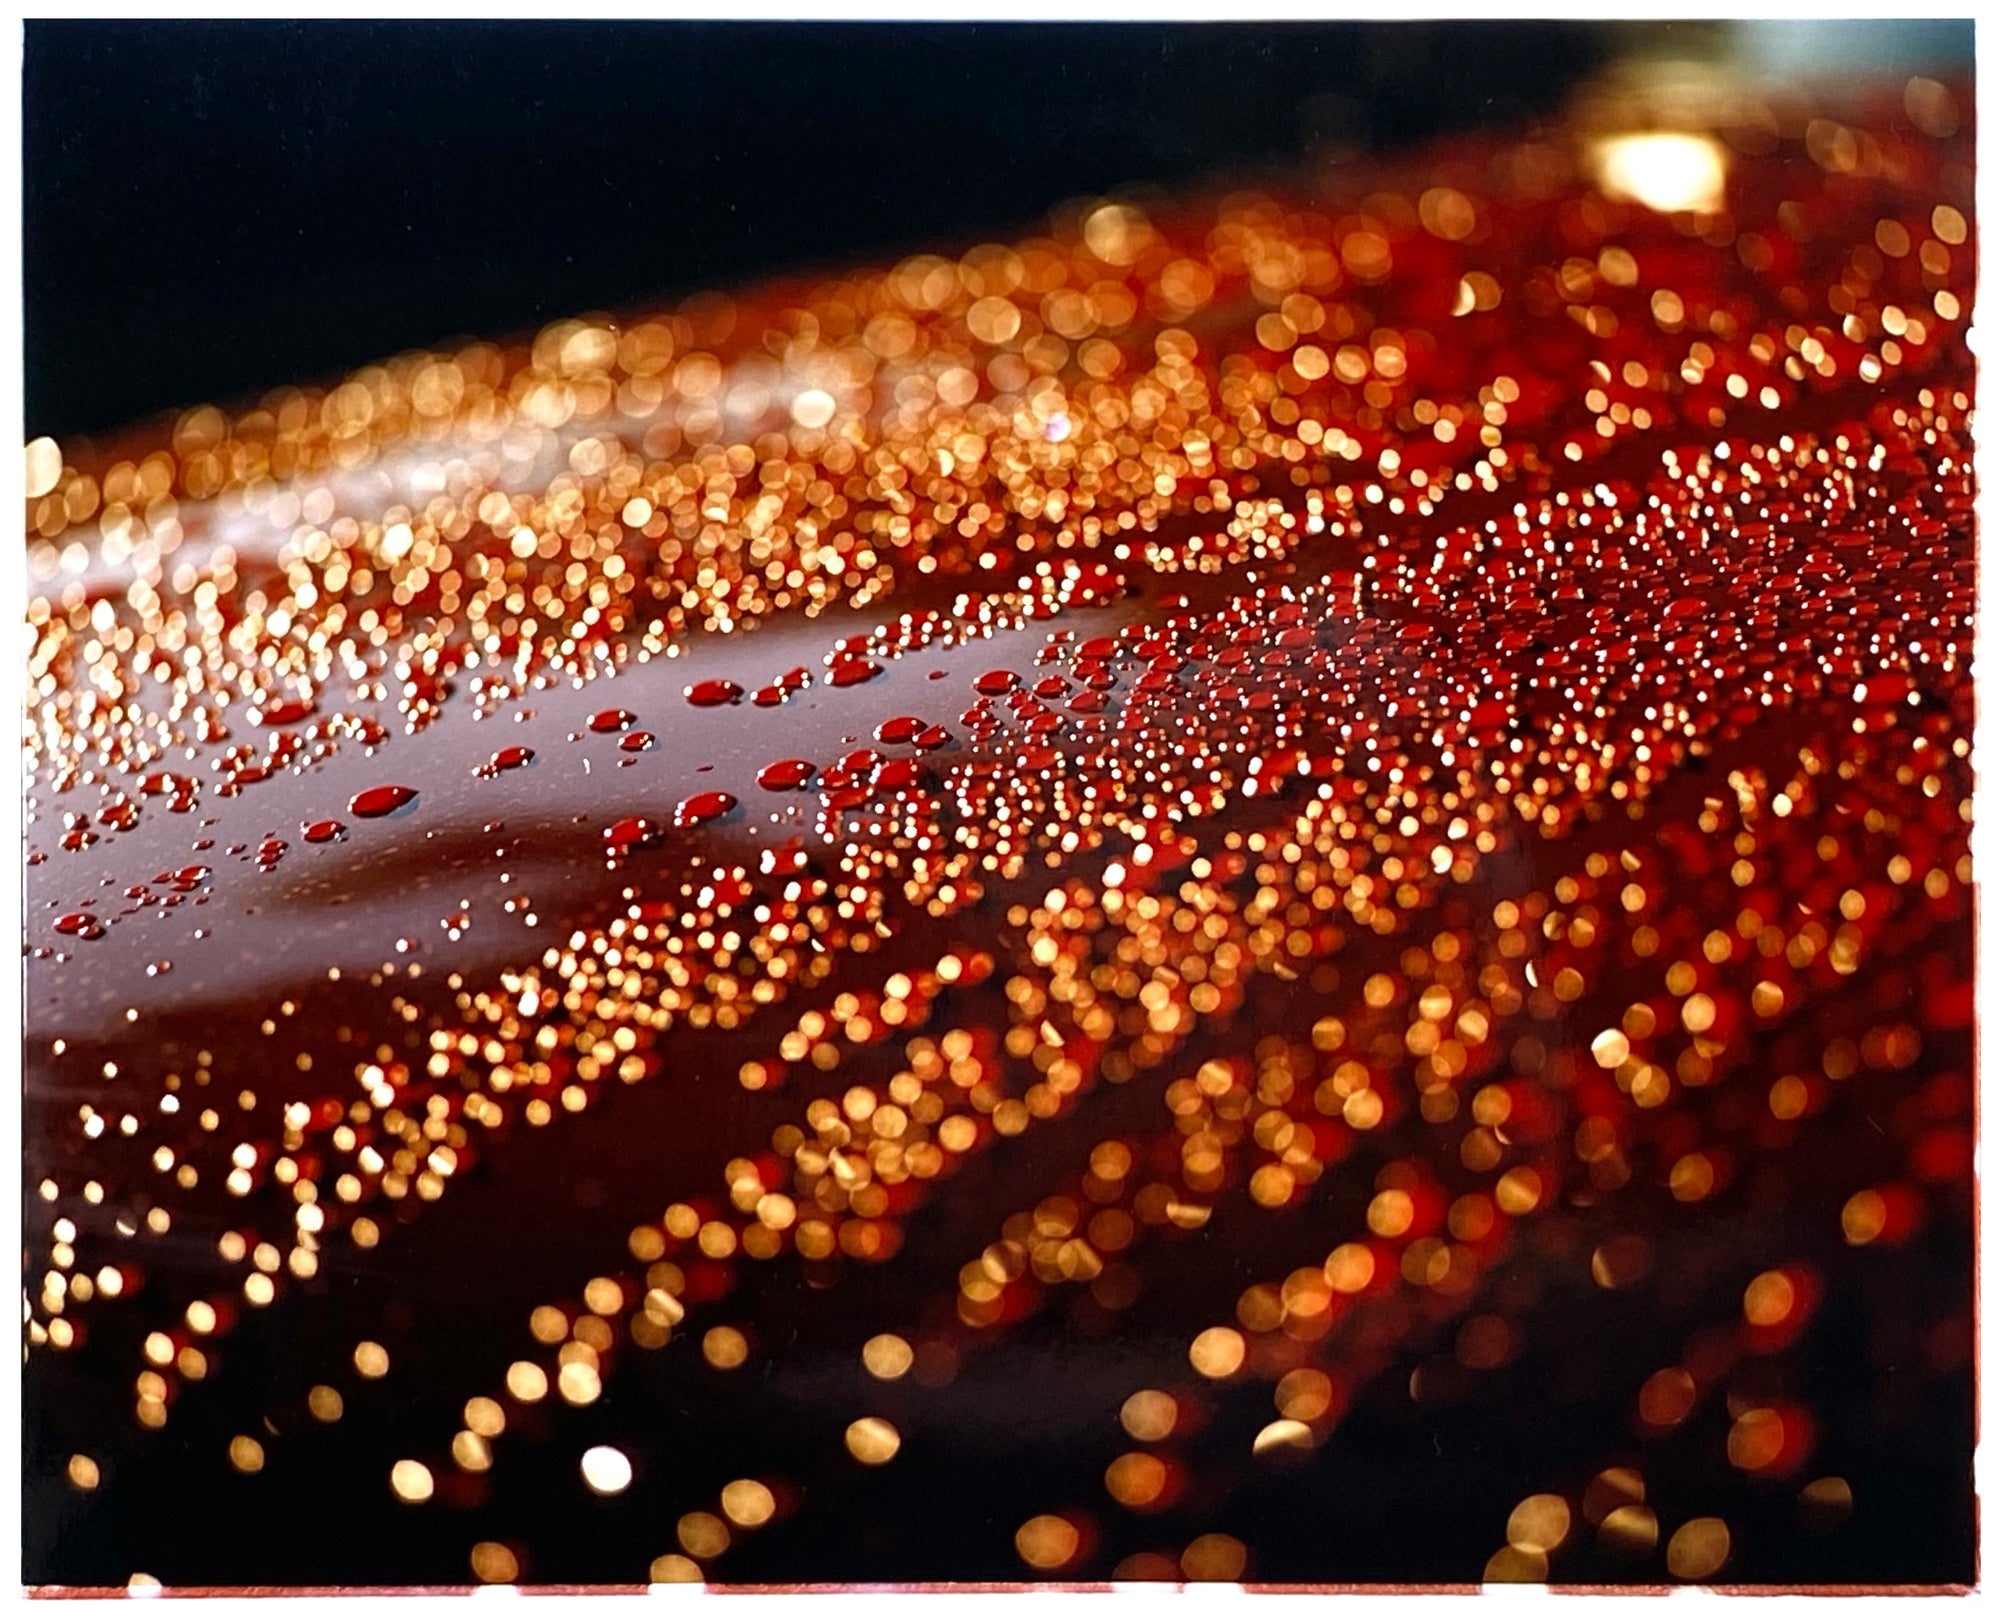 Photograph by Richard Heeps. The photograph is of a brown metal surface with water droplets on. The lighting makes the droplets appear in different colours of orange and brown.